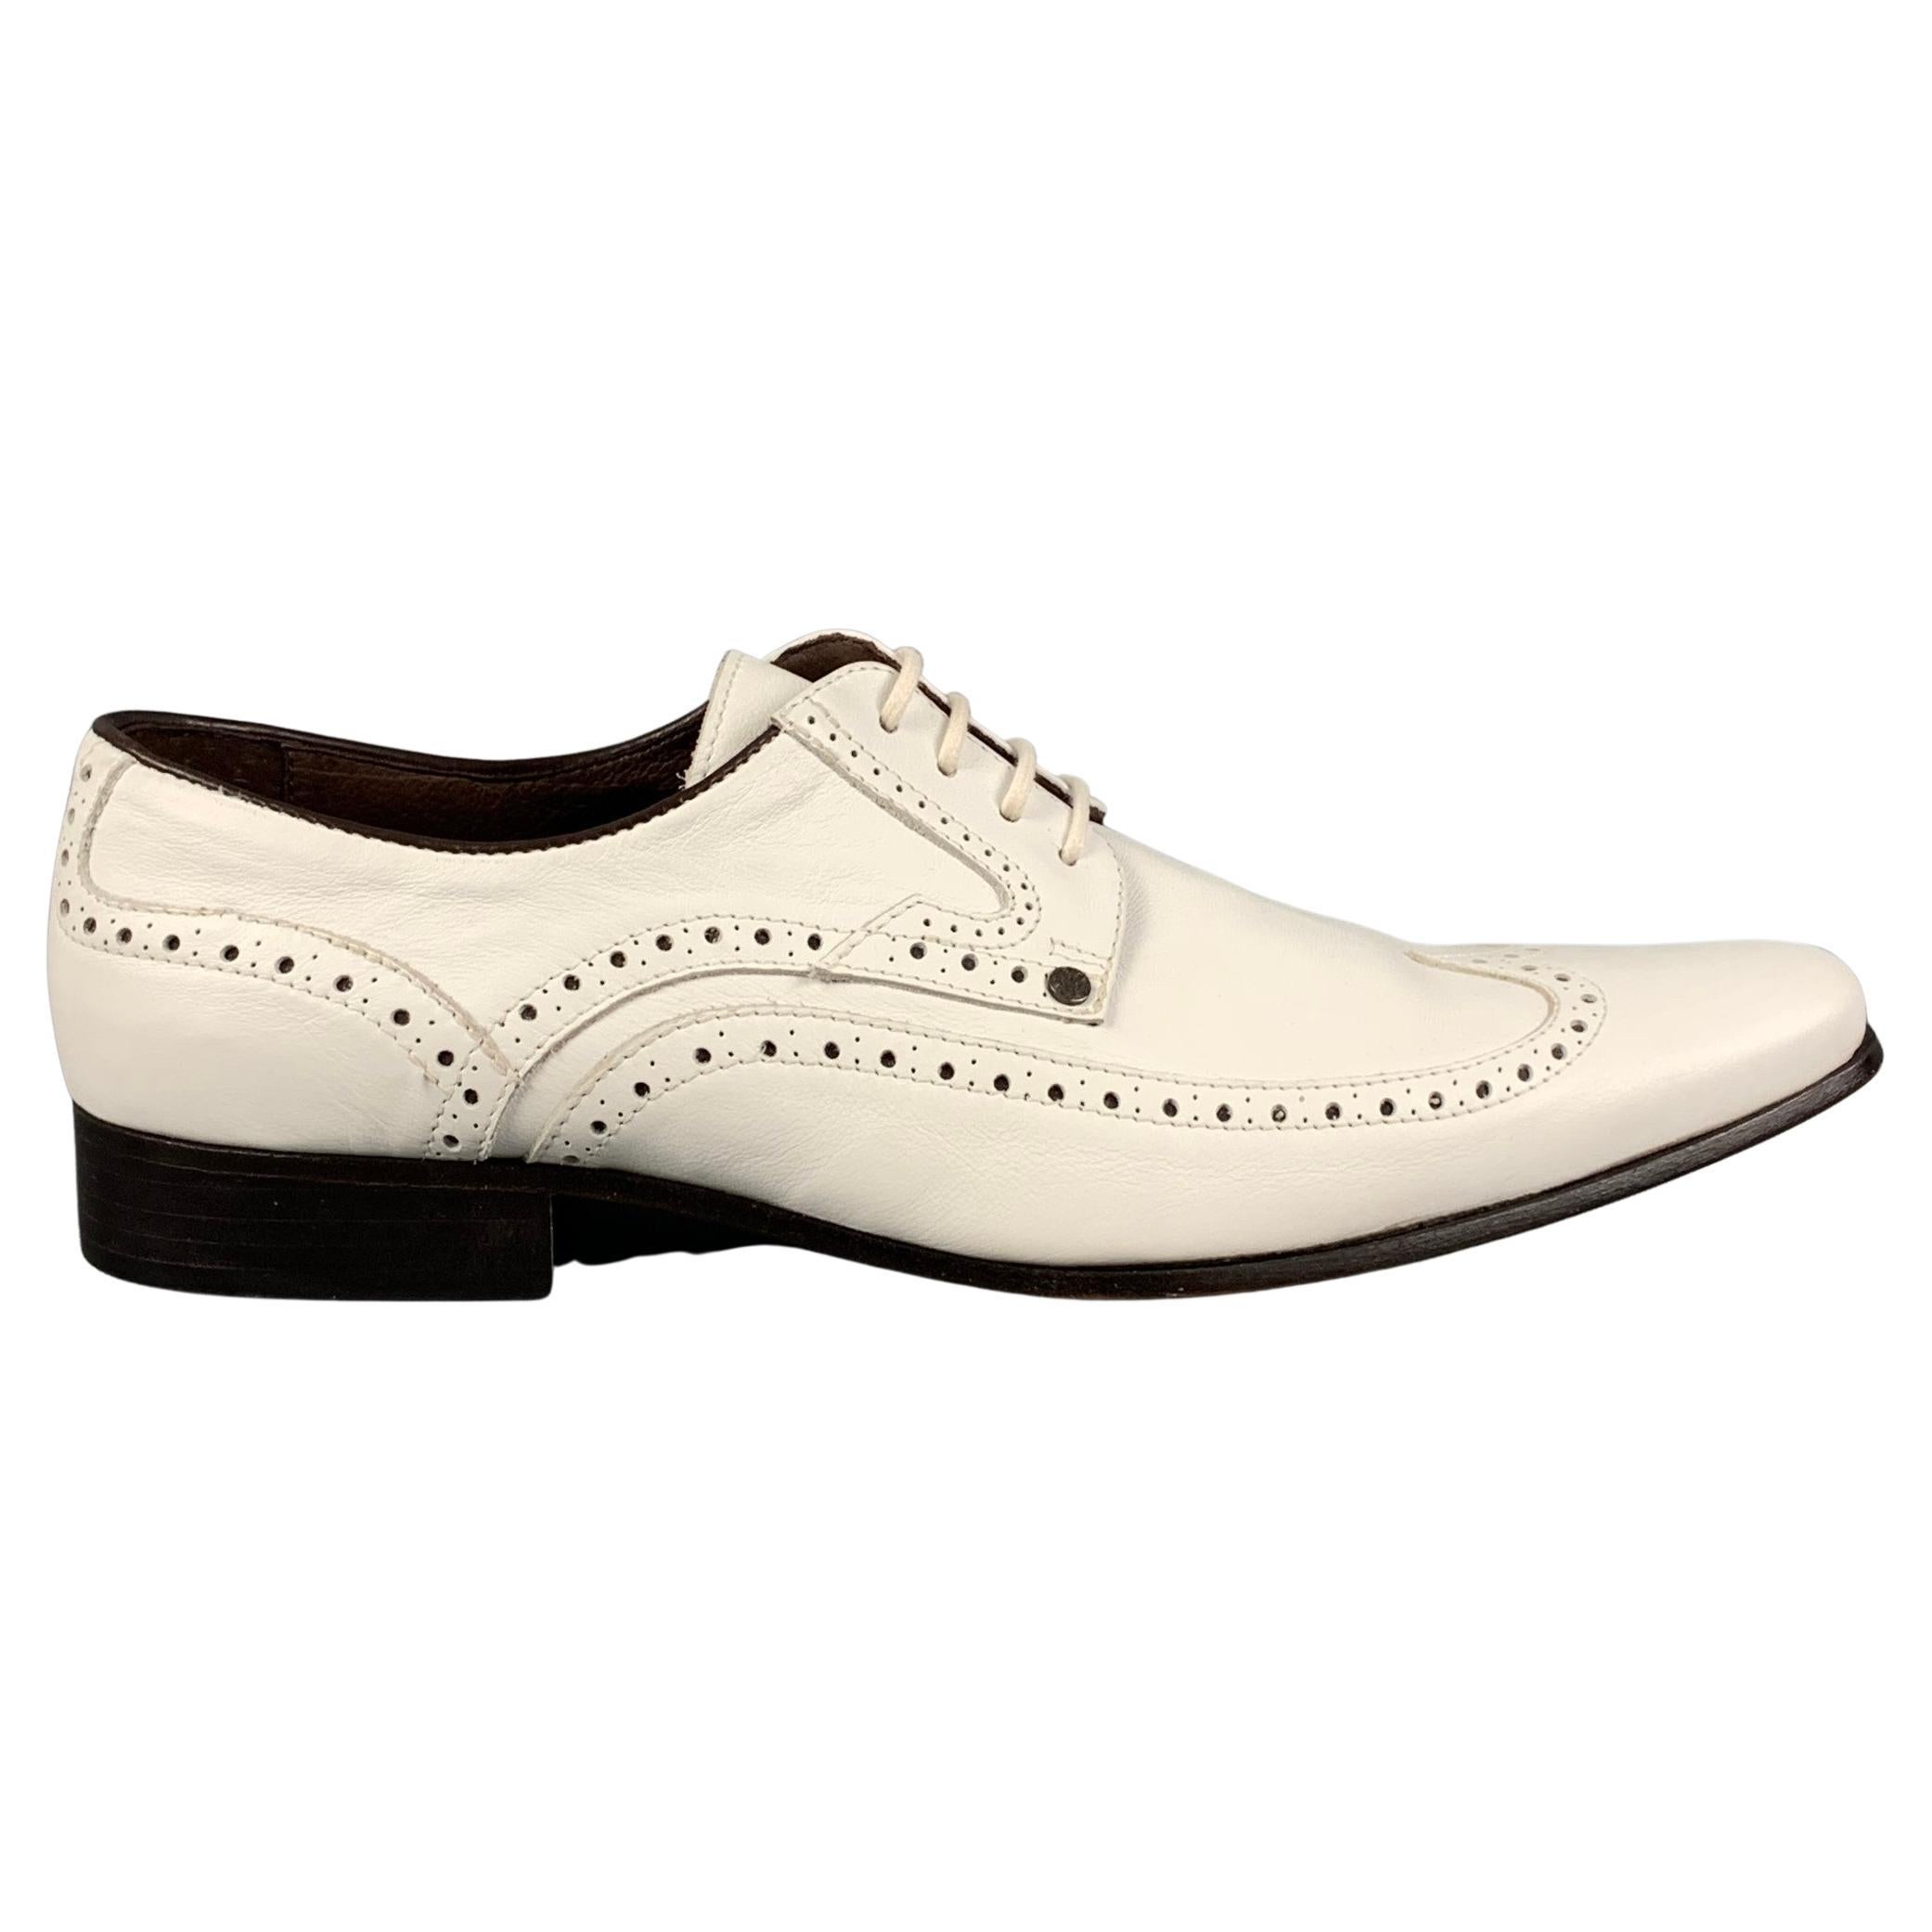 VERSACE Size 9 White Perforated Leather Wingtip Lace Up Shoes